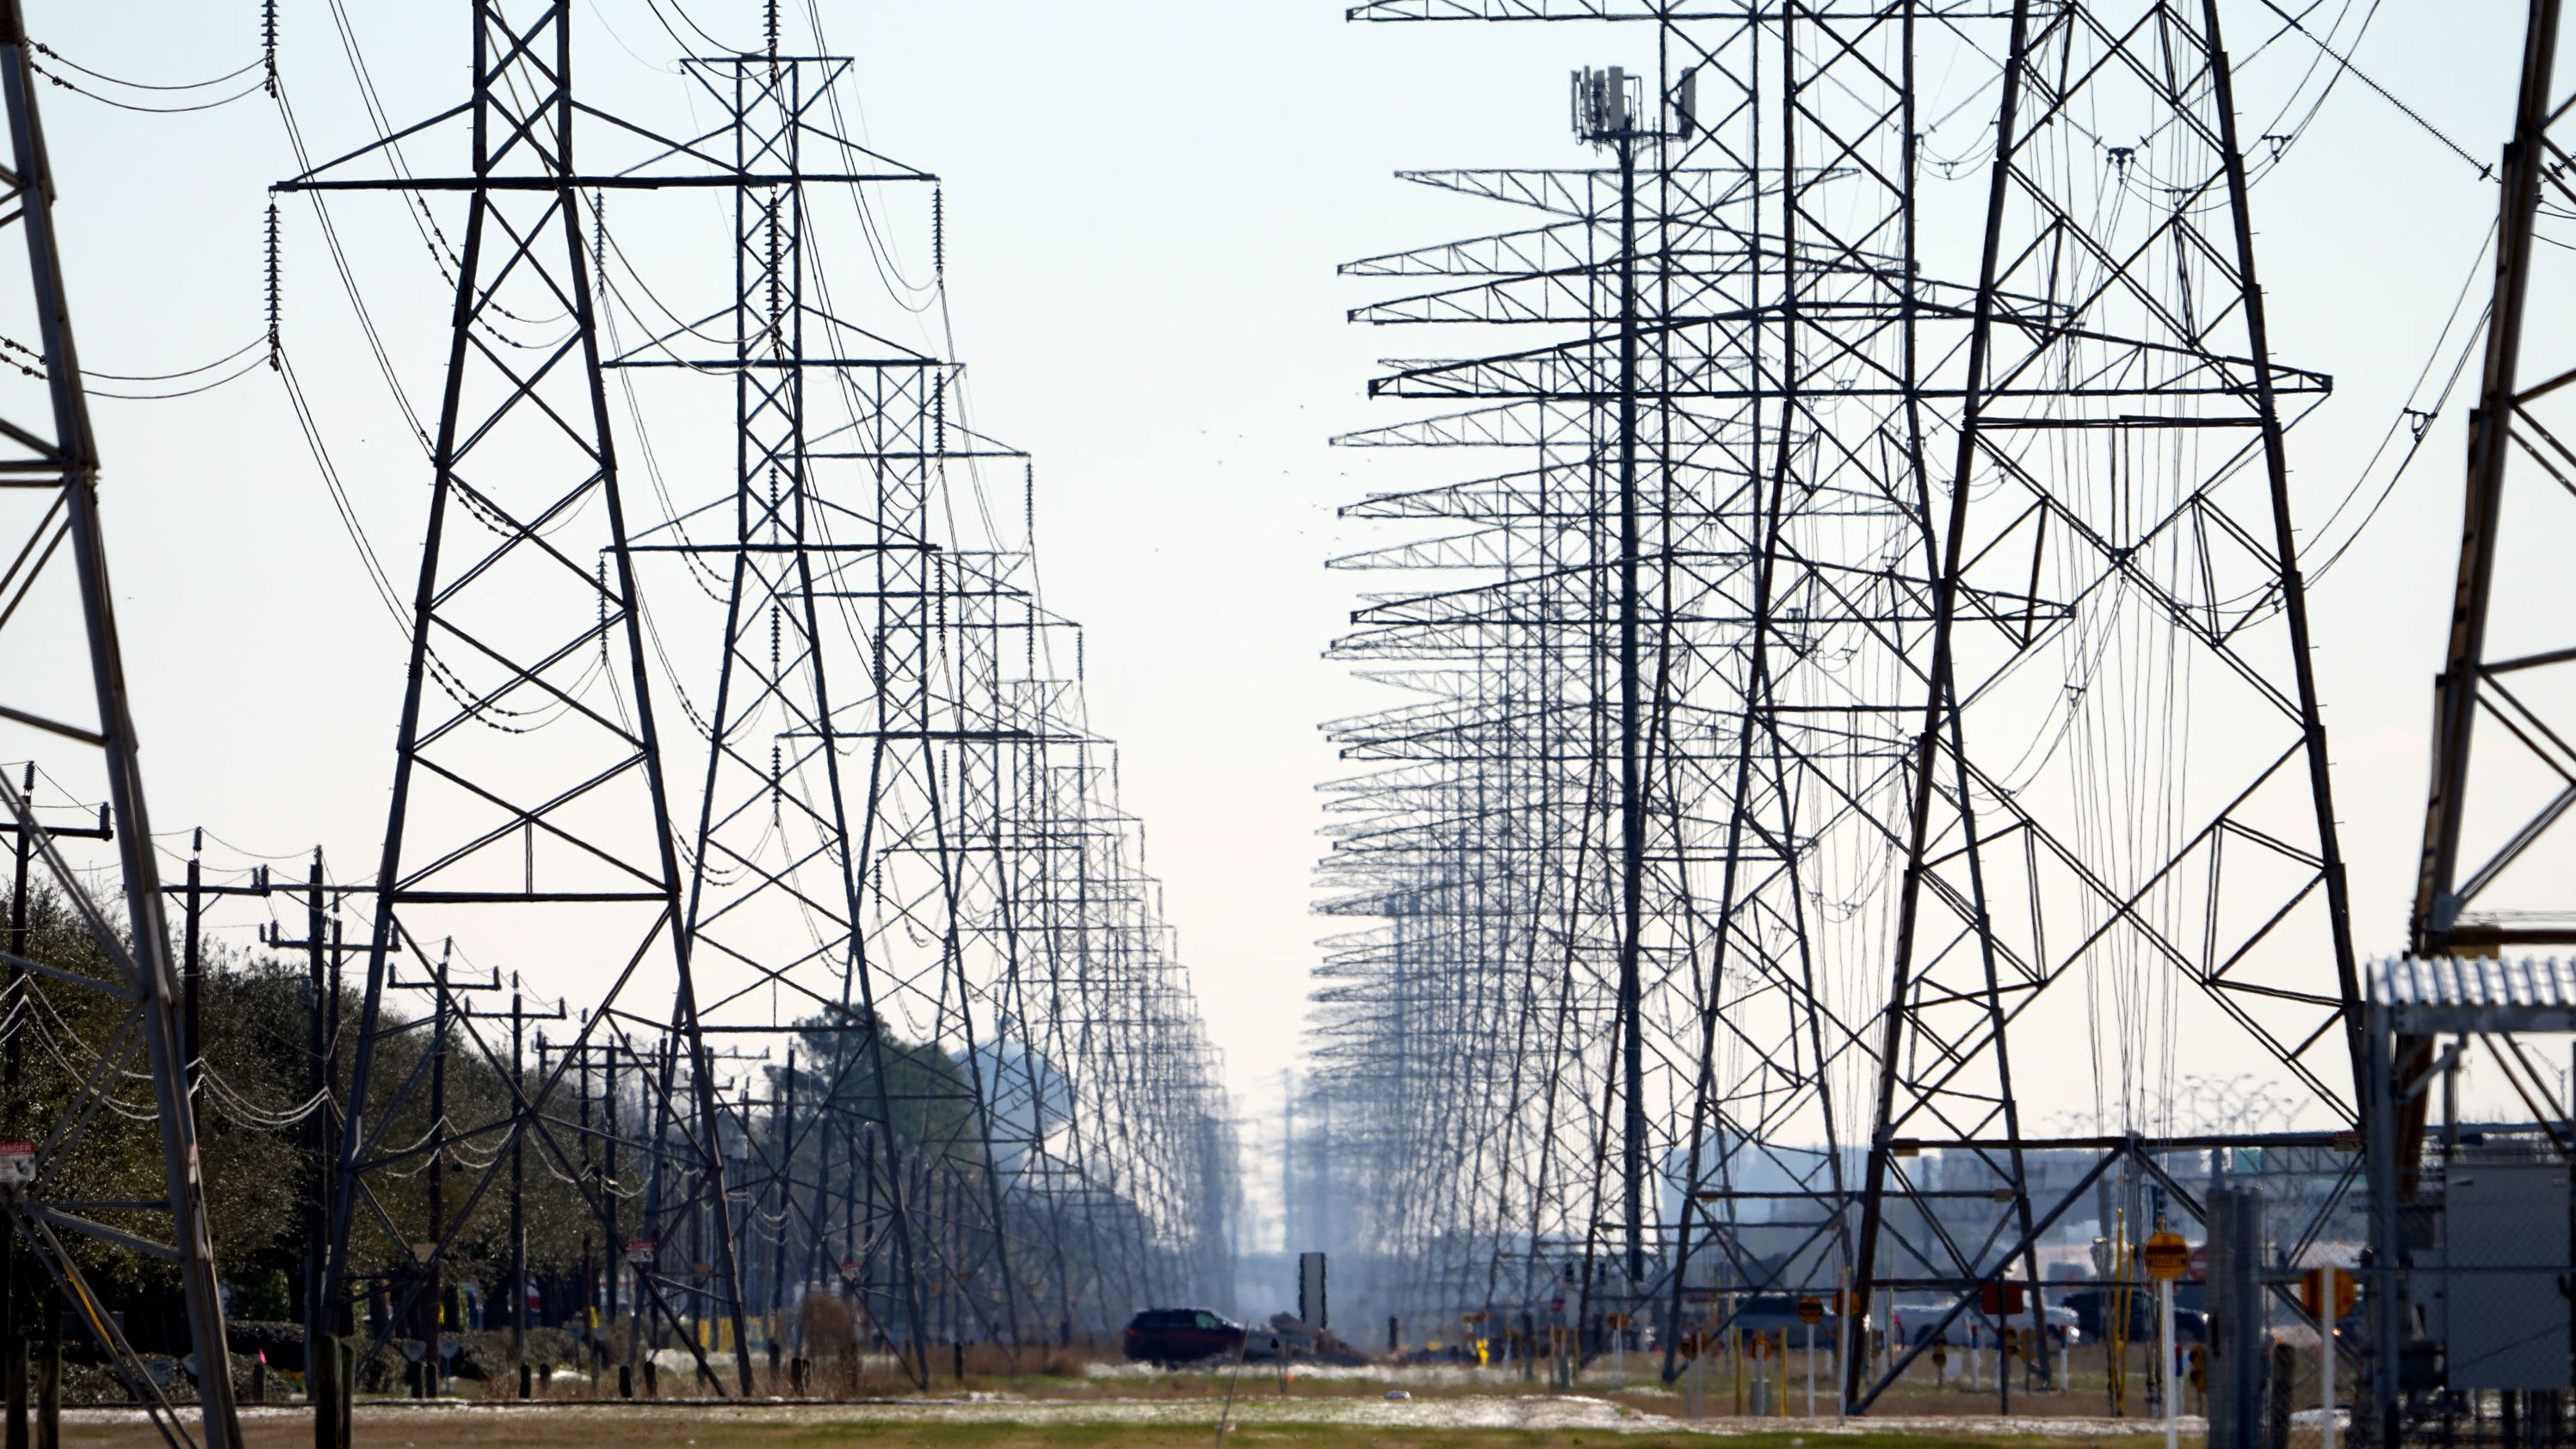 The electric power grid manager for most of Texas has issued its first conservation alert of the summer, calling on users to dial back energy consumption to avert an emergency. (AP Photo/David J. Phillip)